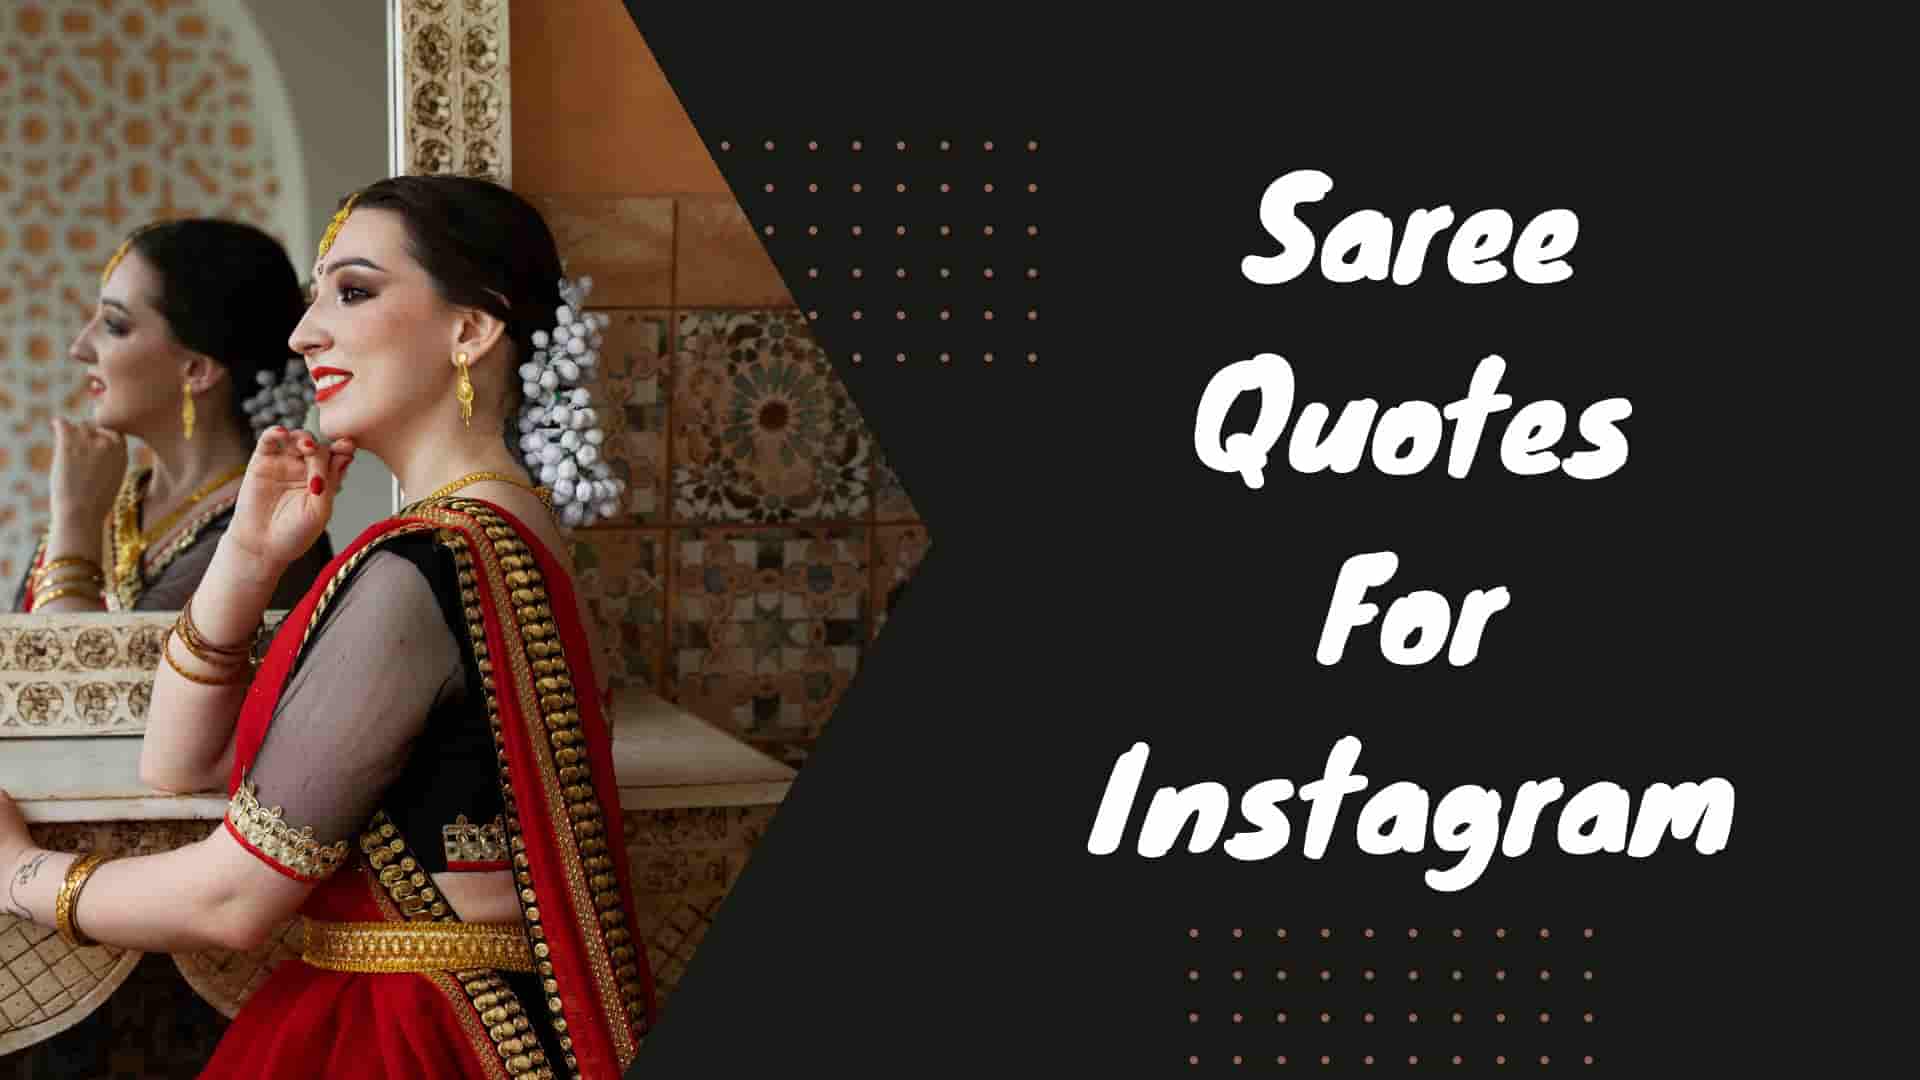 Top 13 Saree Quotes That We Can Relate To!